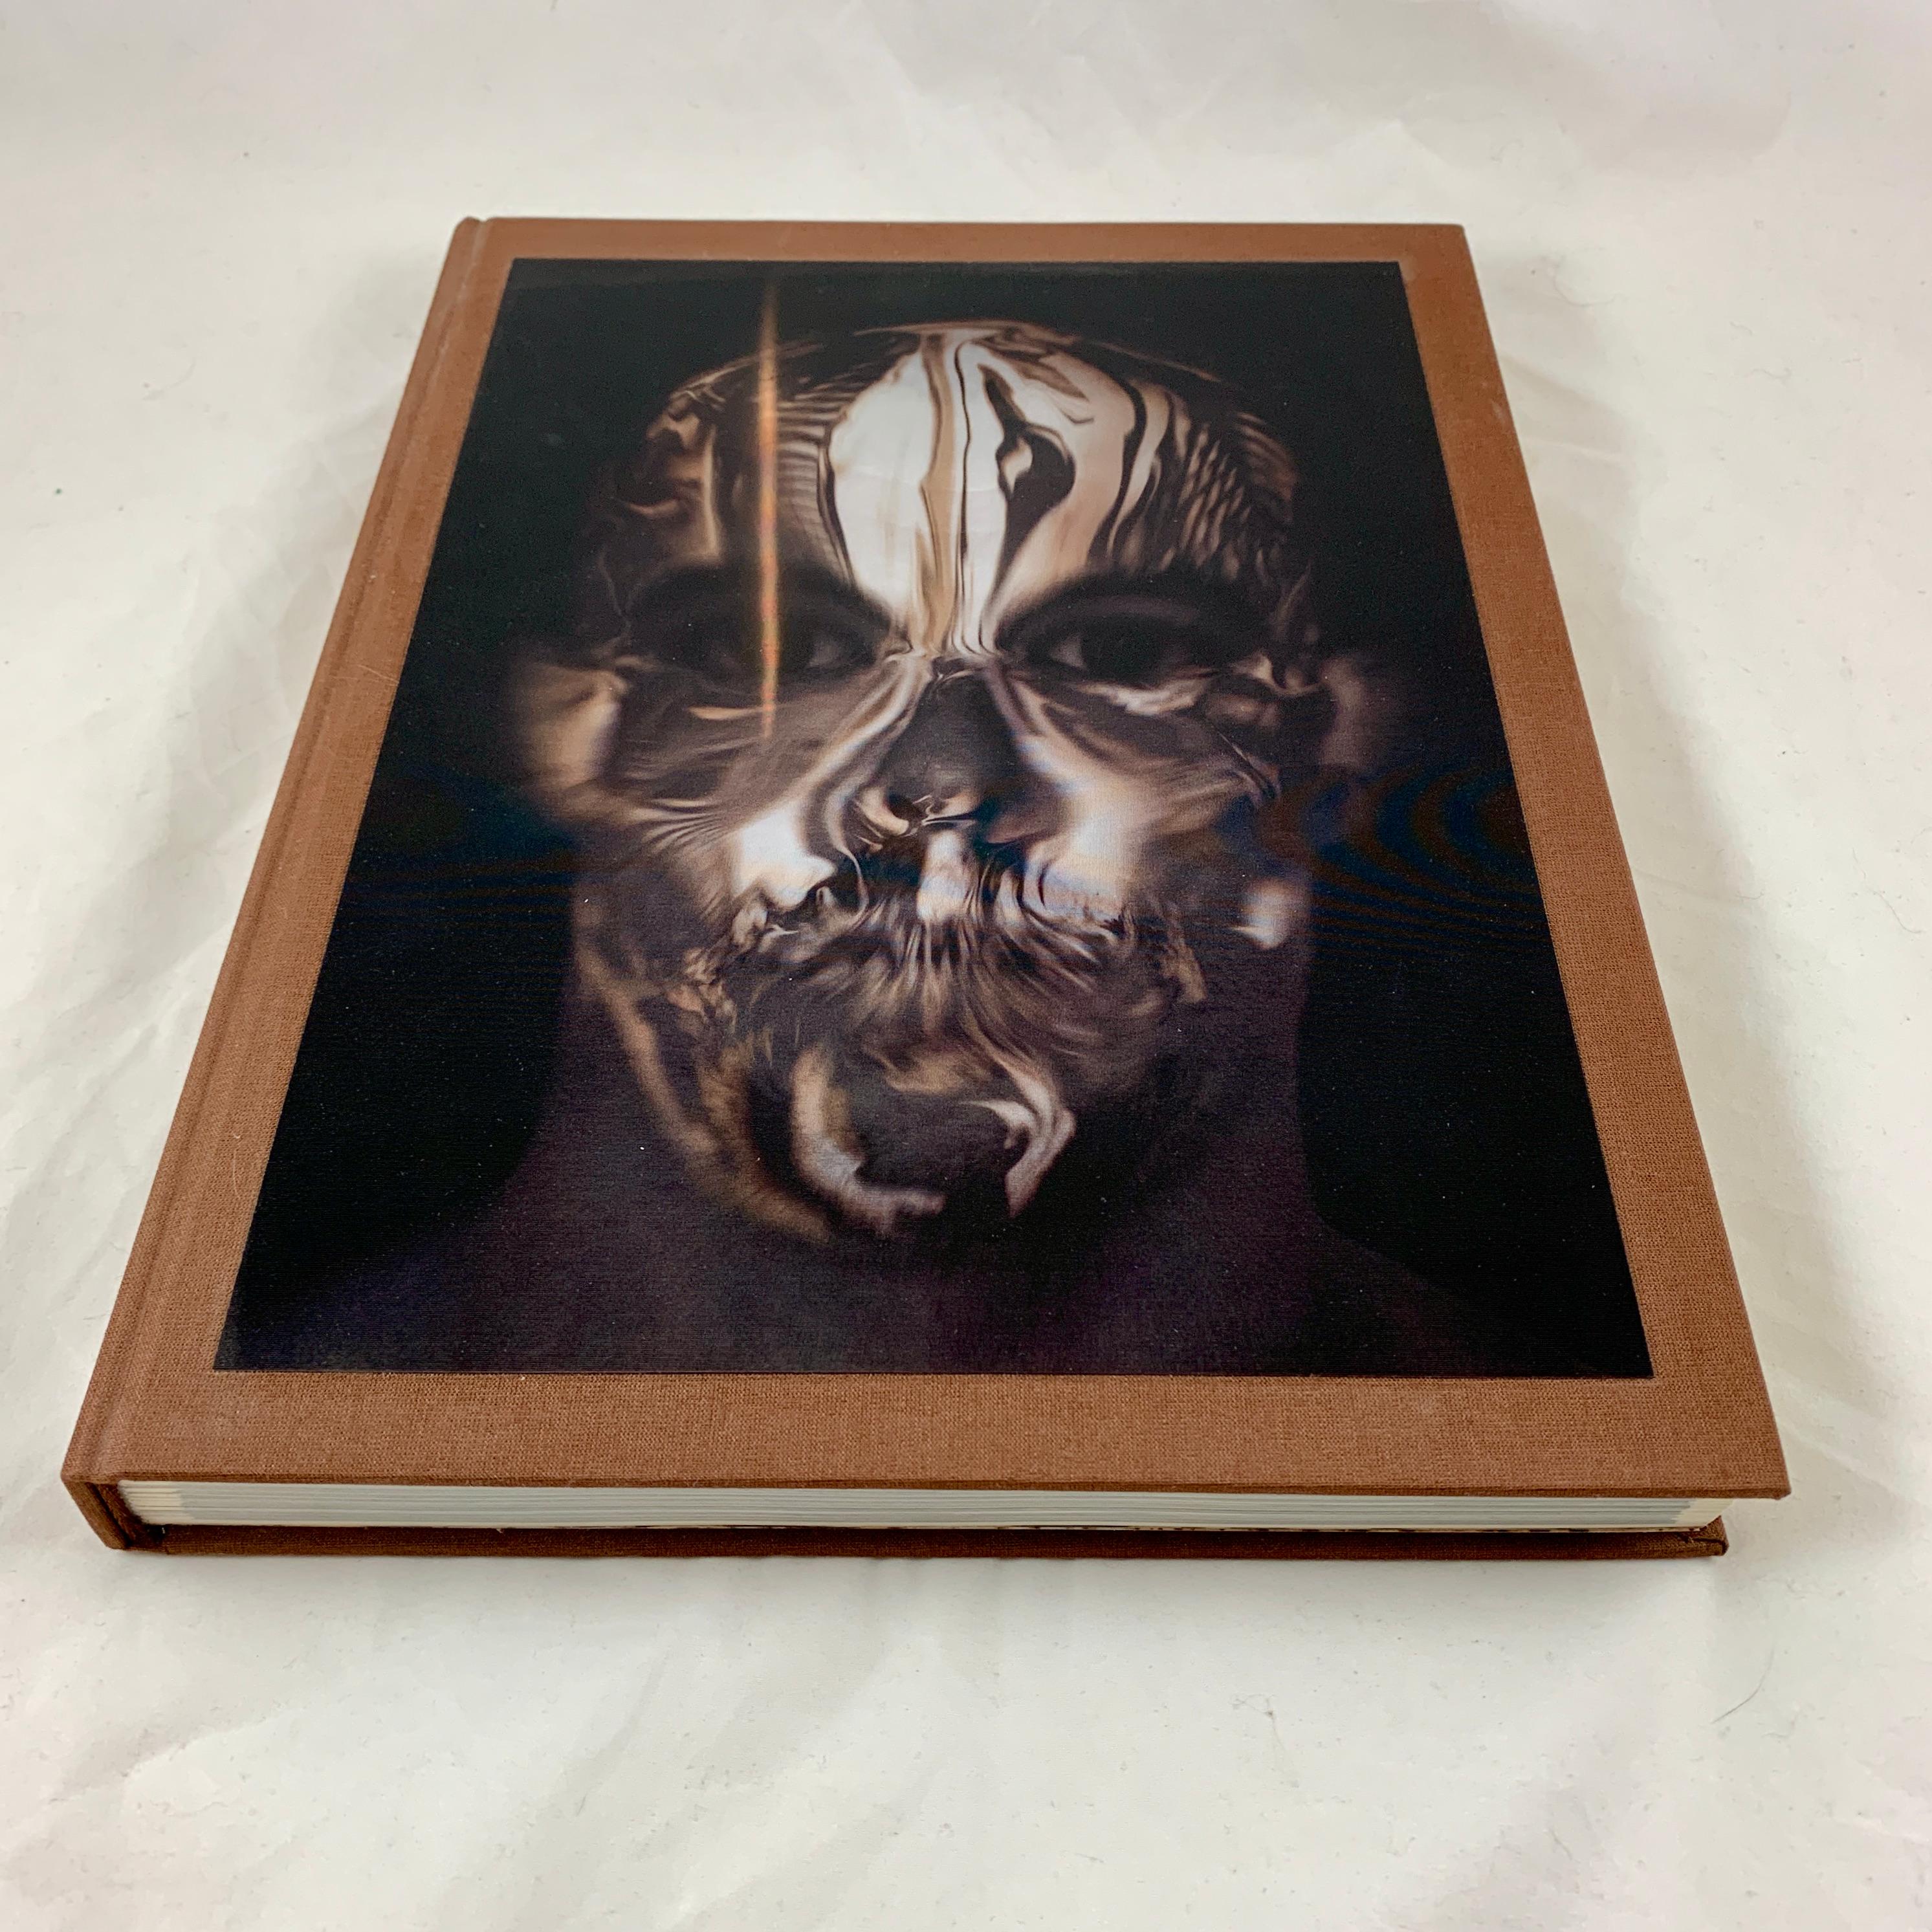 International Style Alexander McQueen: Savage Beauty, Andrew Bolton MOMA Illustrated Hardcover Book